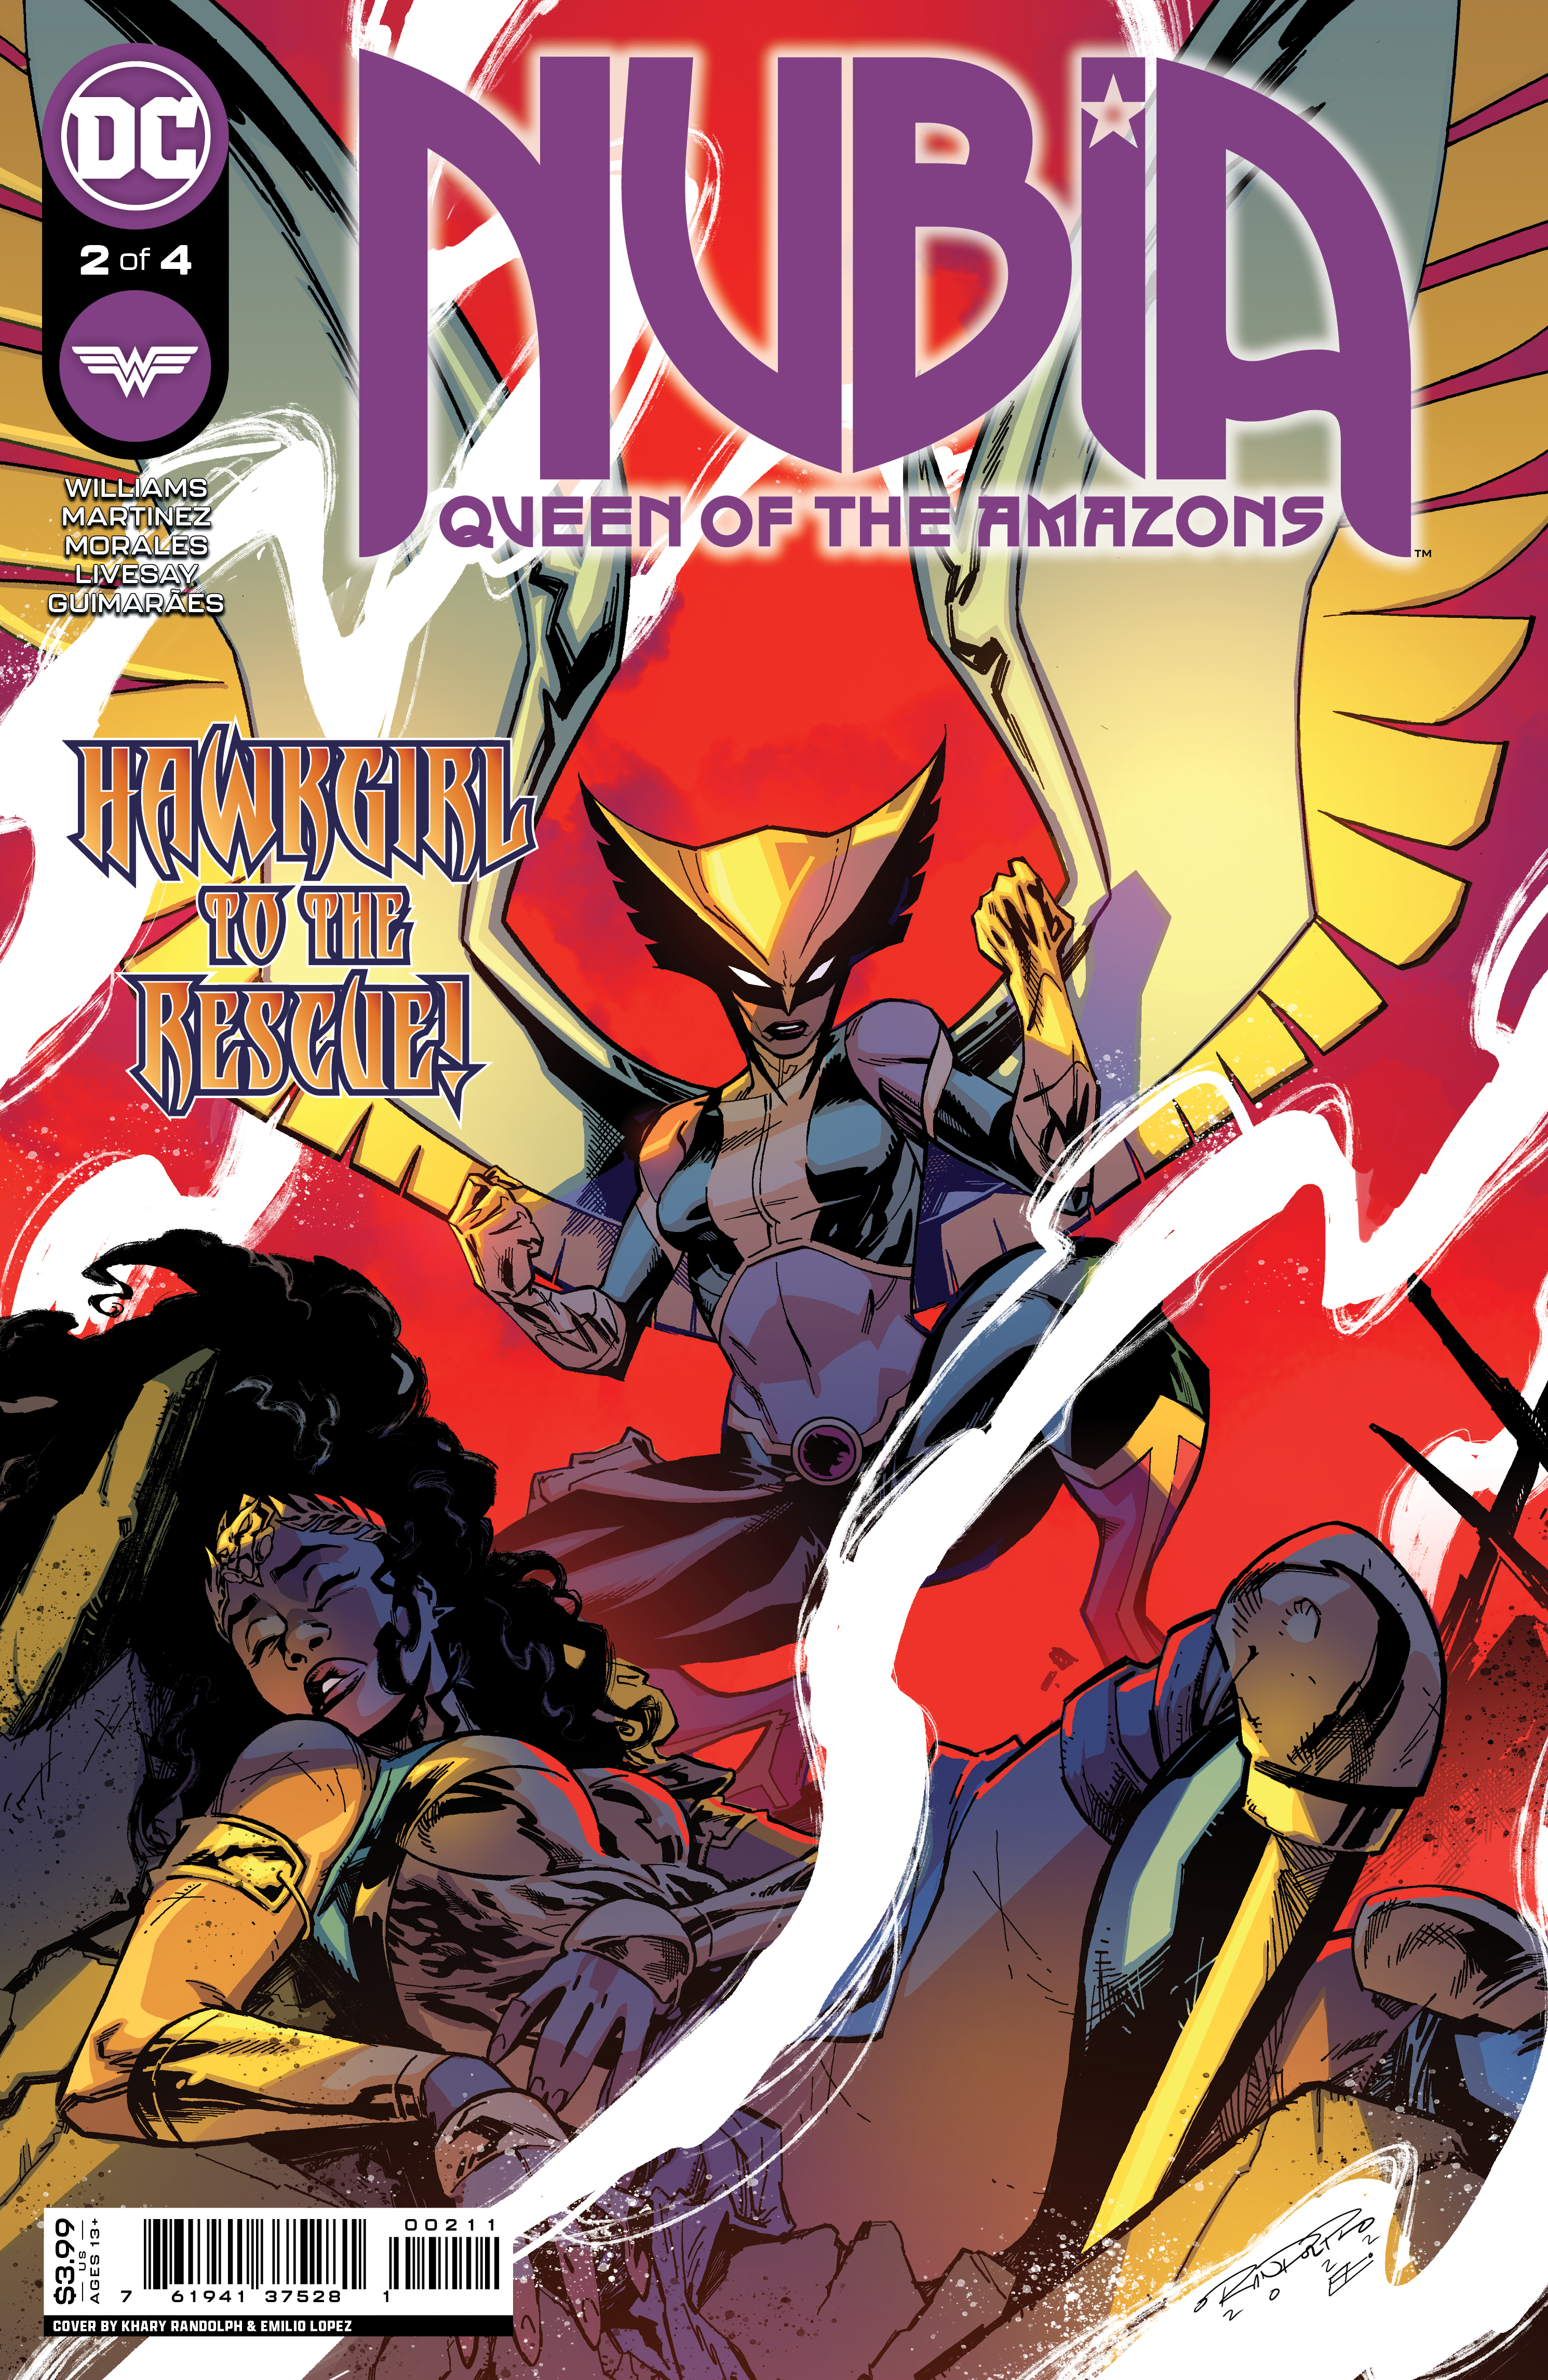 Nubia Queen of the Amazons #2 Cover A Khary Randolph (Of 4)